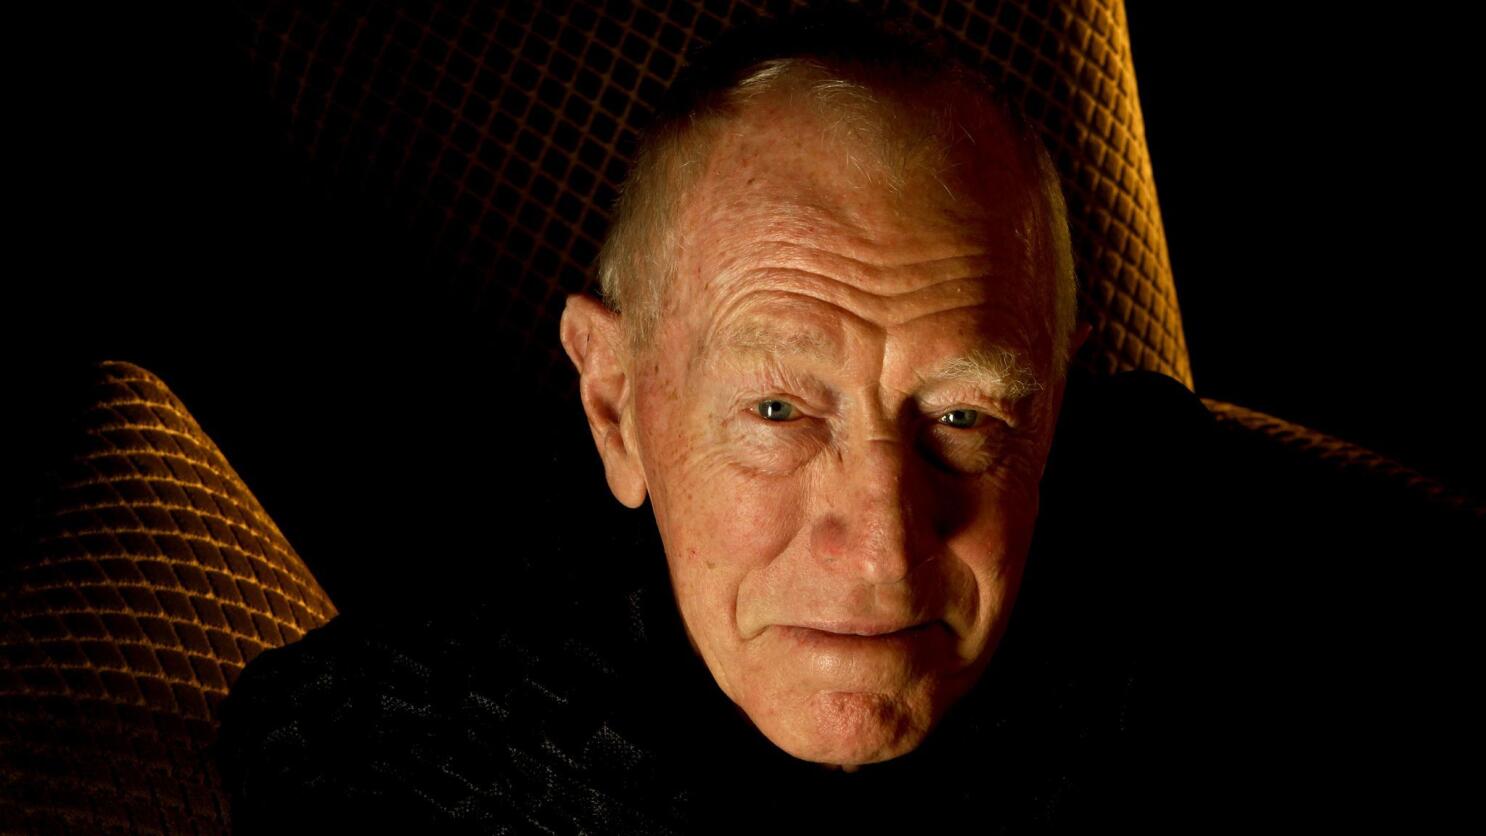 Max von Sydow dead: Swedish star's films included 'The Greatest